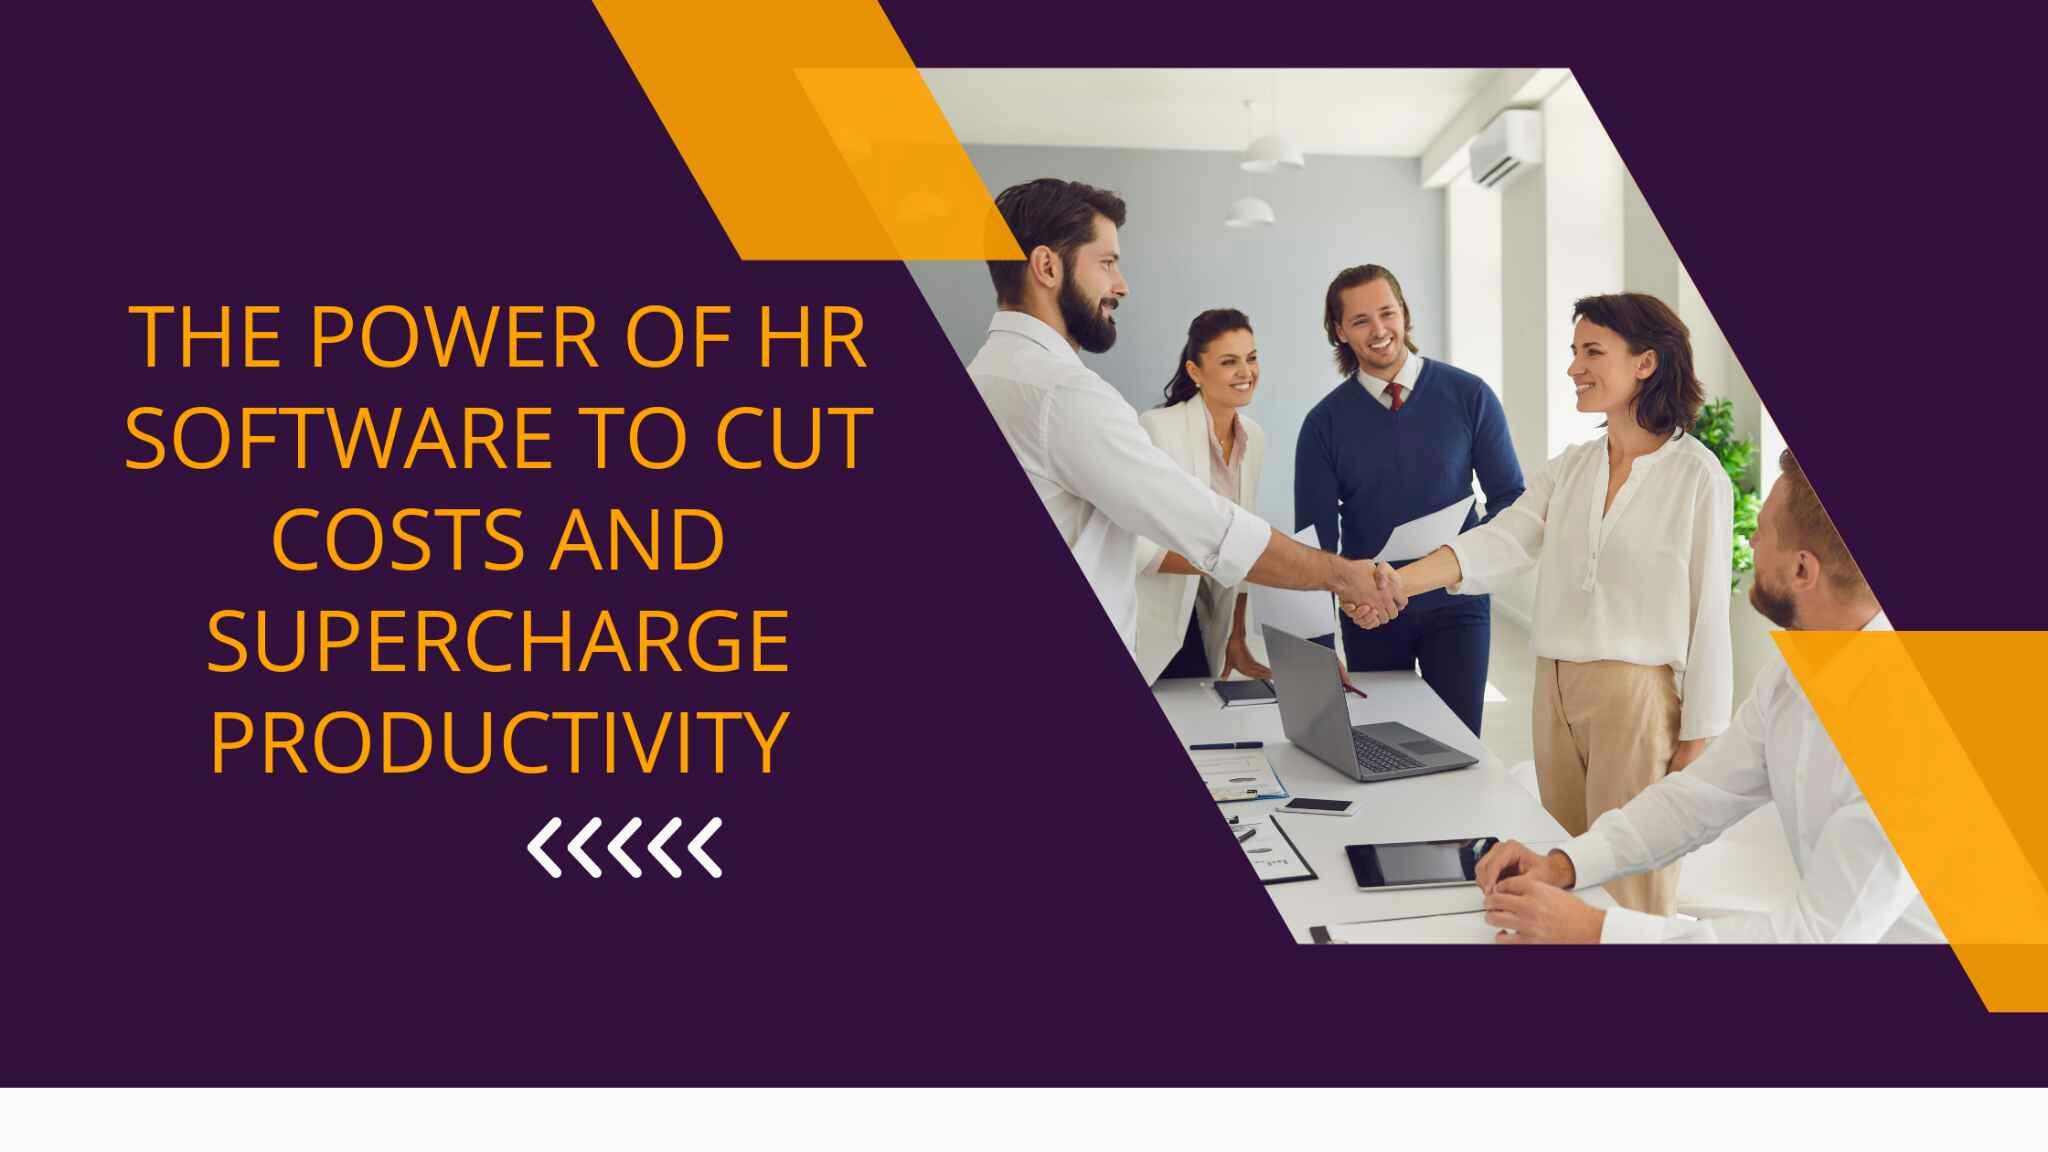 The Power of HR Software to Cut Costs and Supercharge Productivity